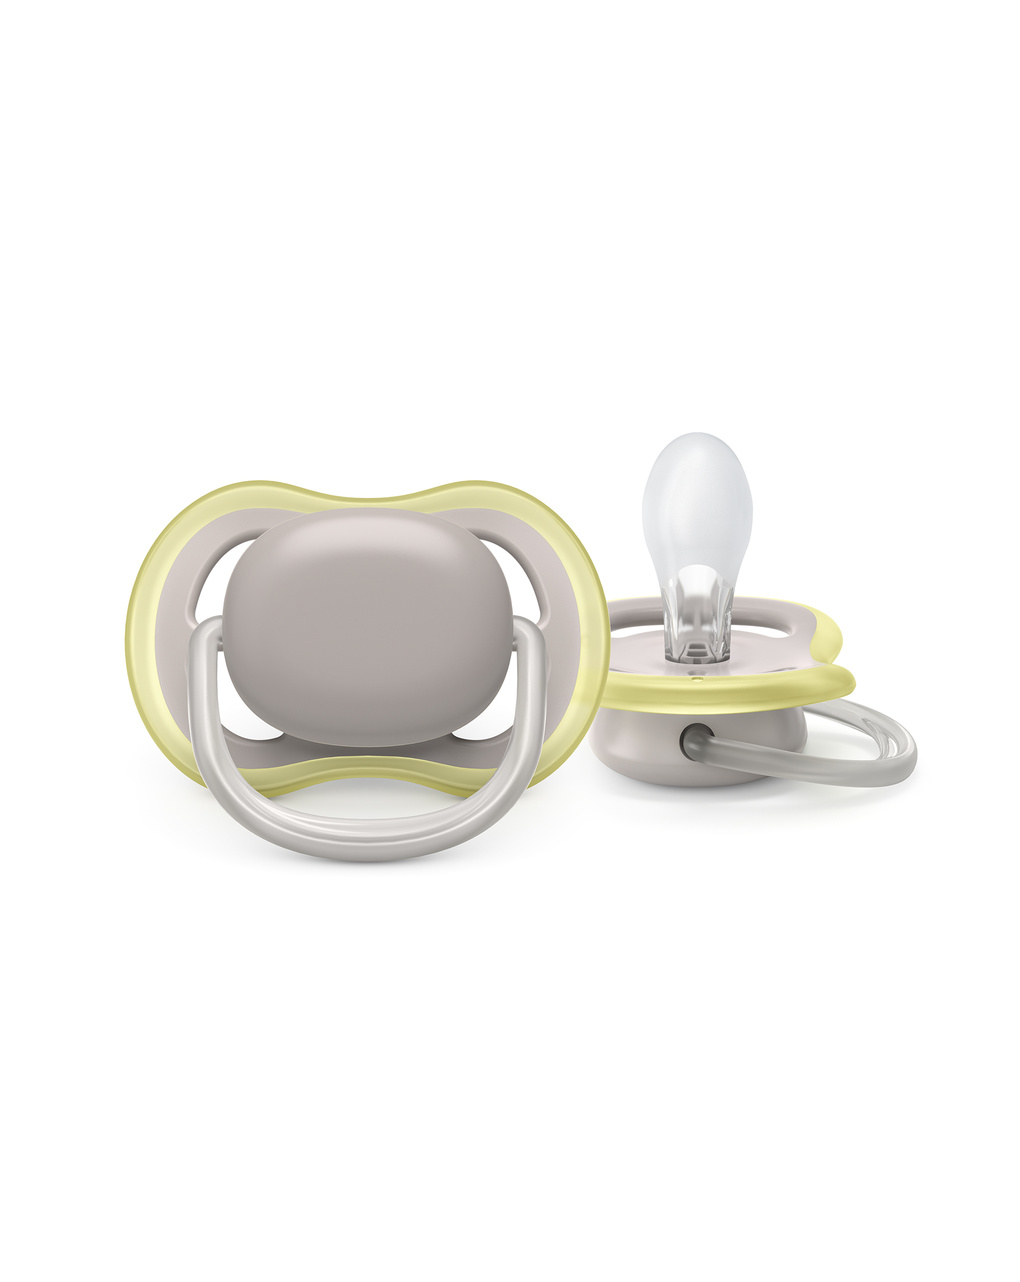 2 chupetes ultra air 6-18 meses verde/gris - philips avent - Philips Avent